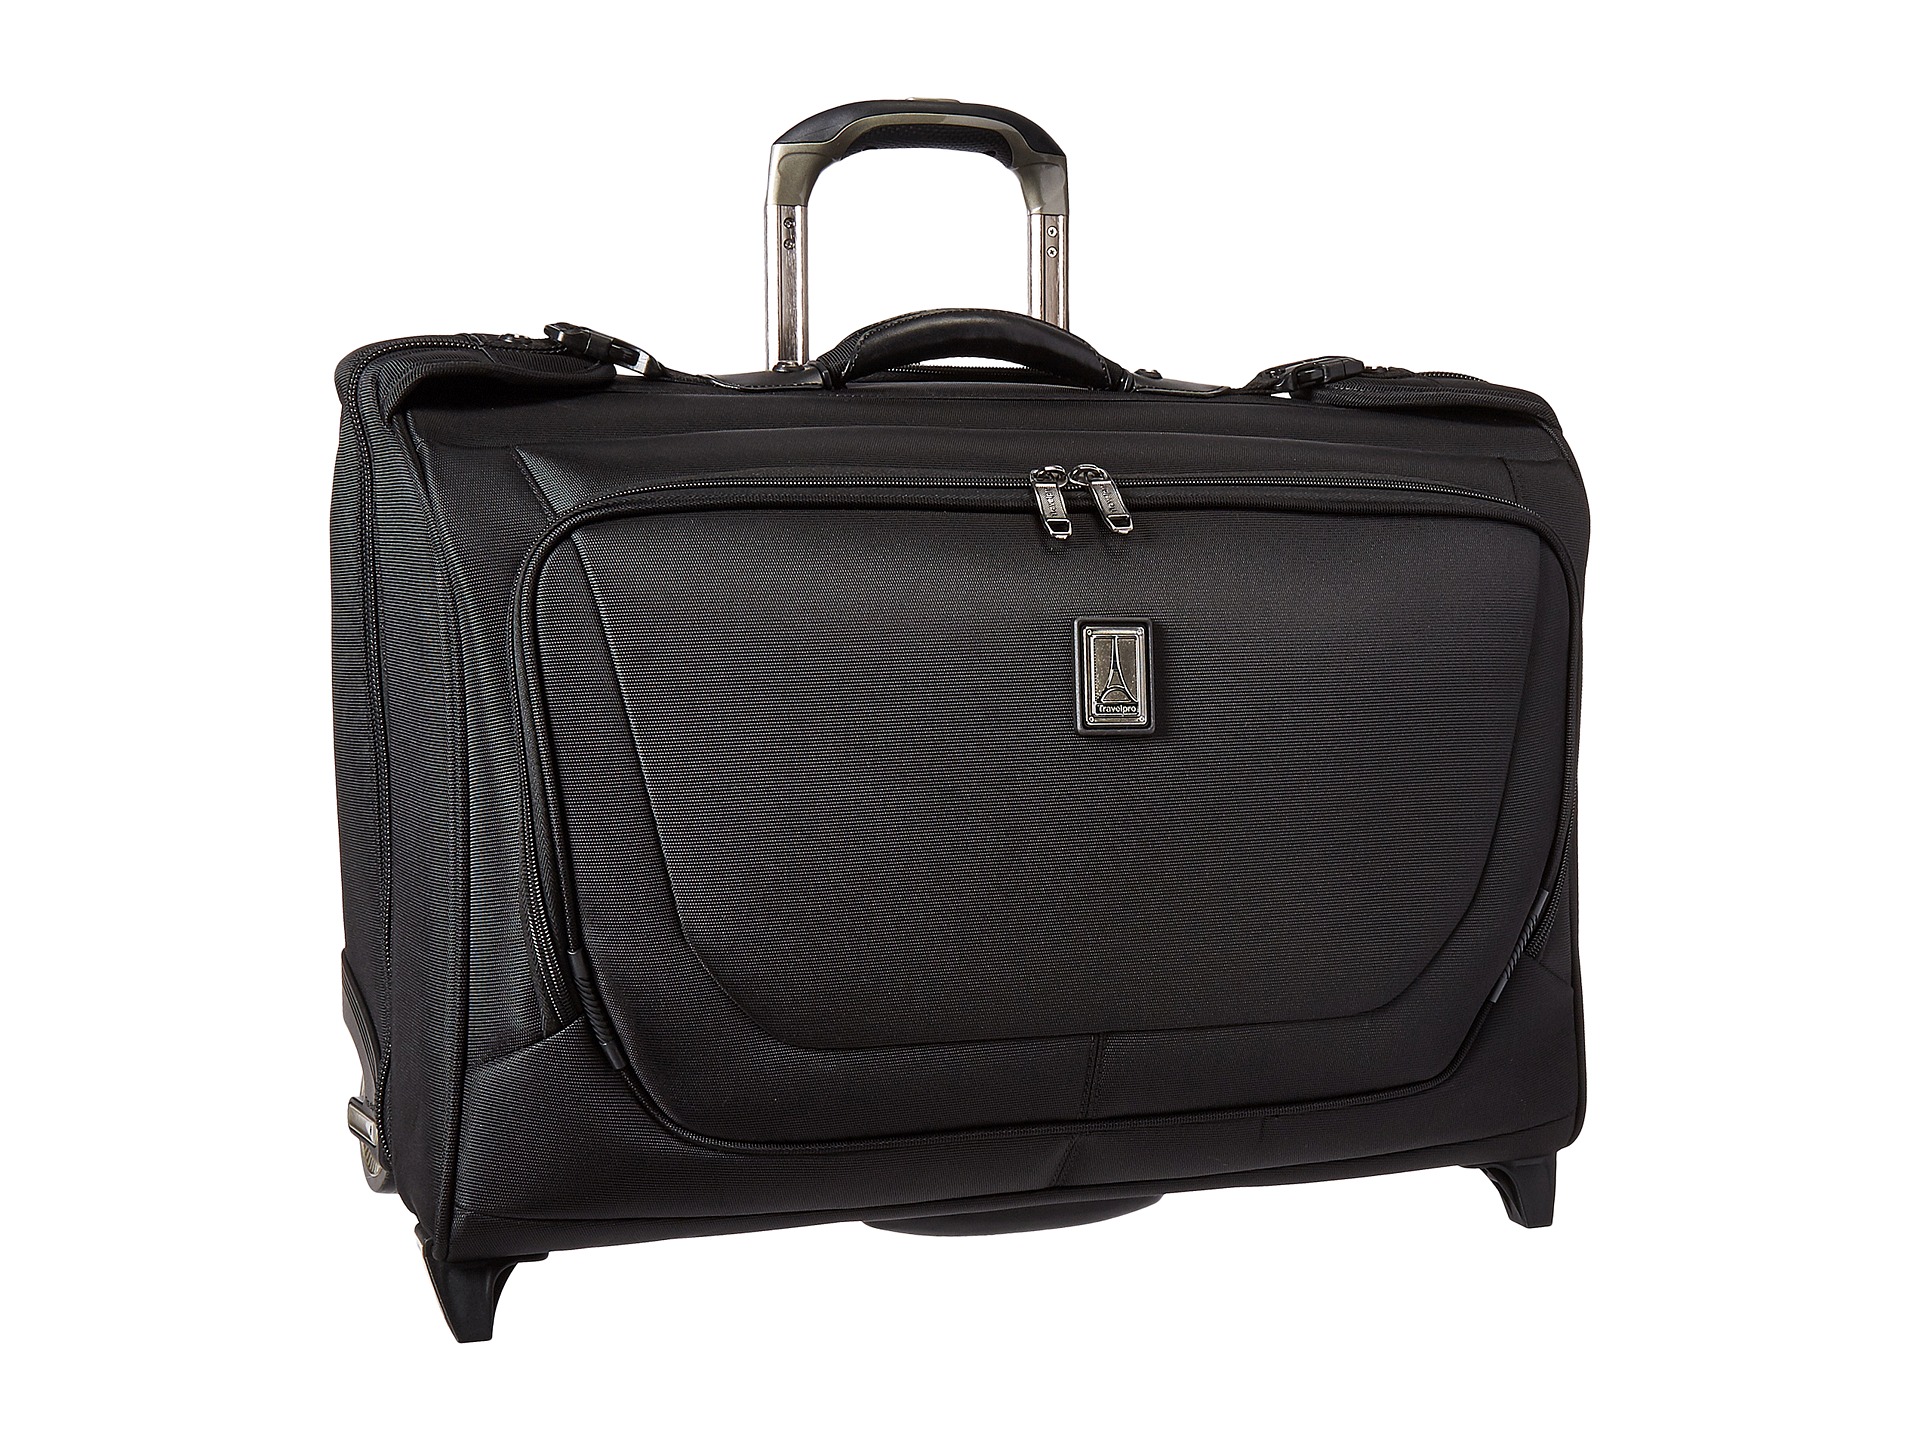 Travelpro Crew 11 - Carry-On Rolling Garment Bag - 0 Free Shipping BOTH Ways